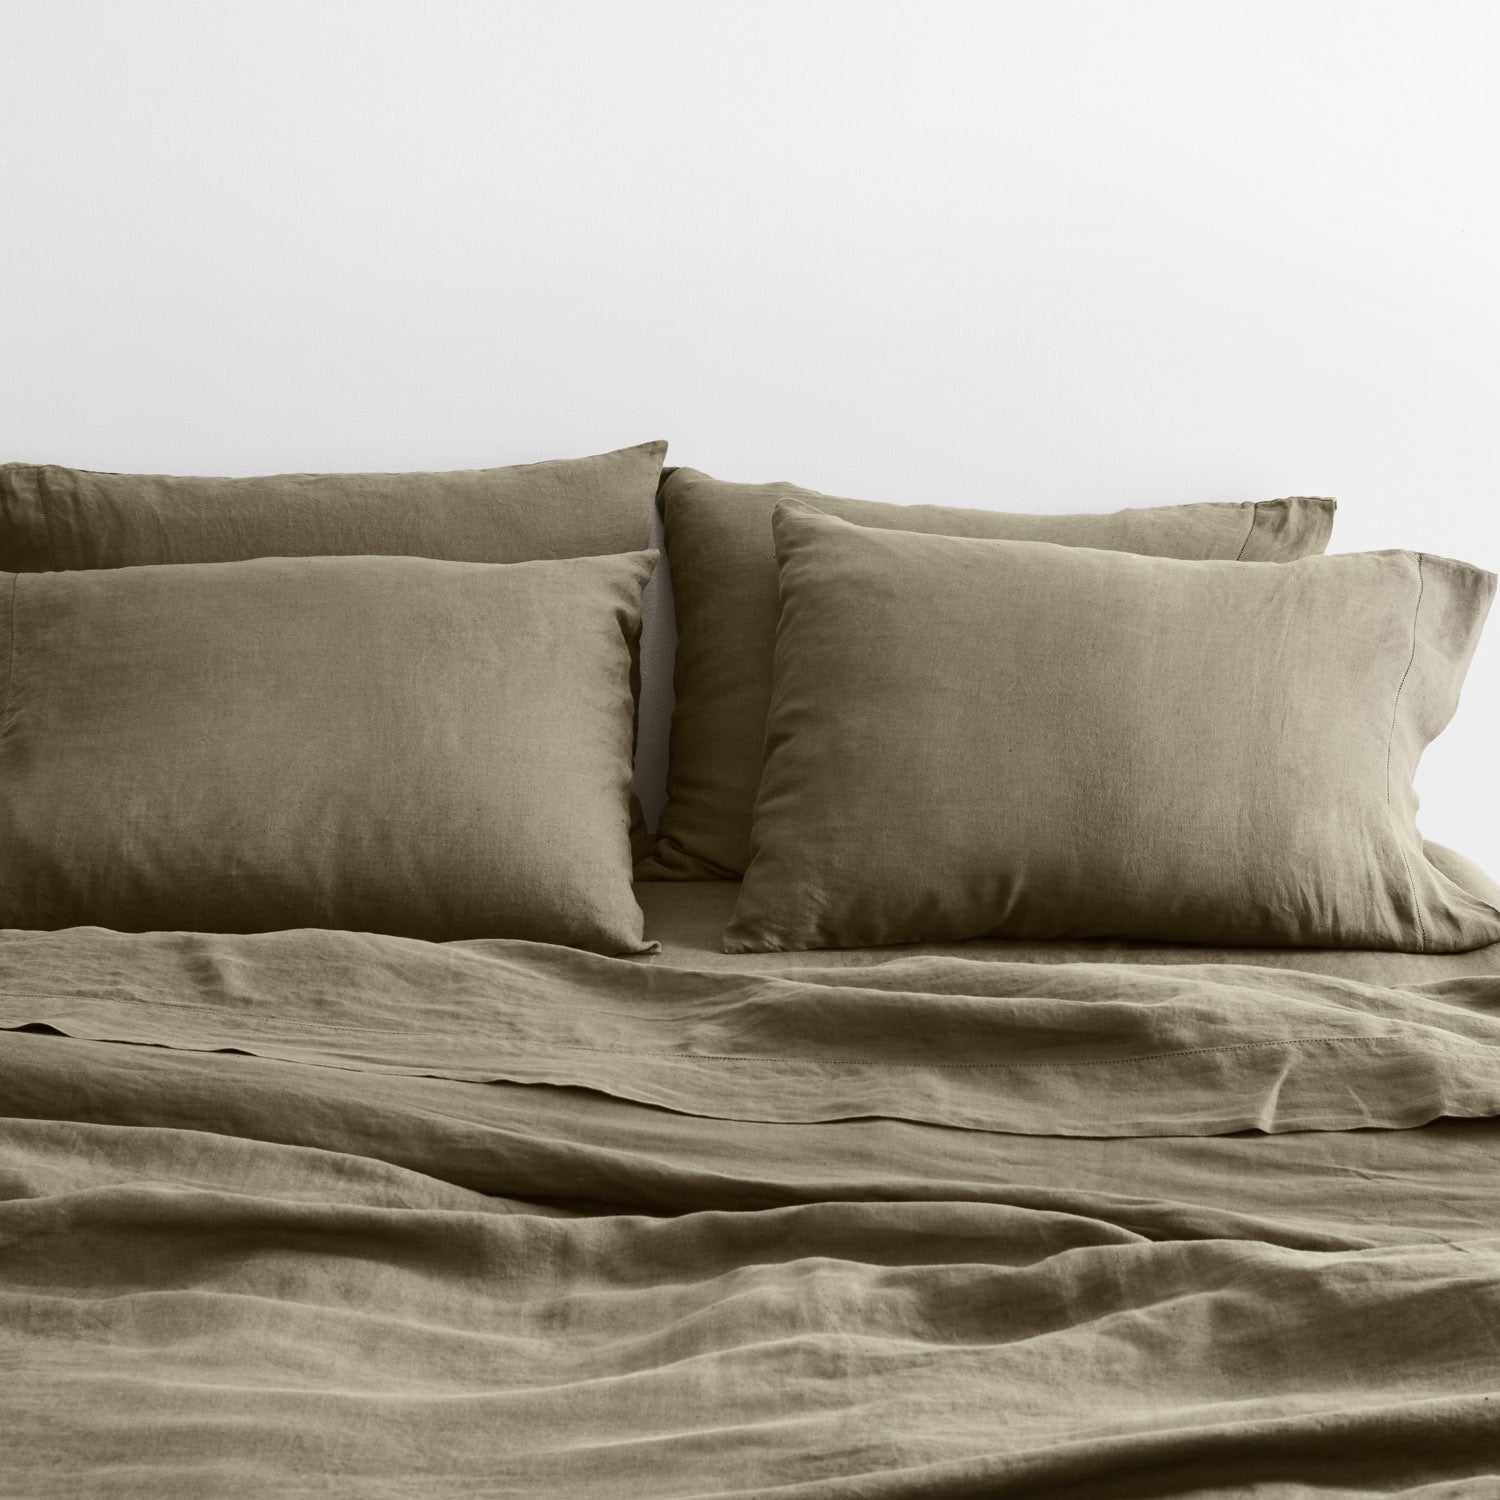 The Citizenry Stonewashed Linen Bed Bundle | Queen | Sand - Image 1